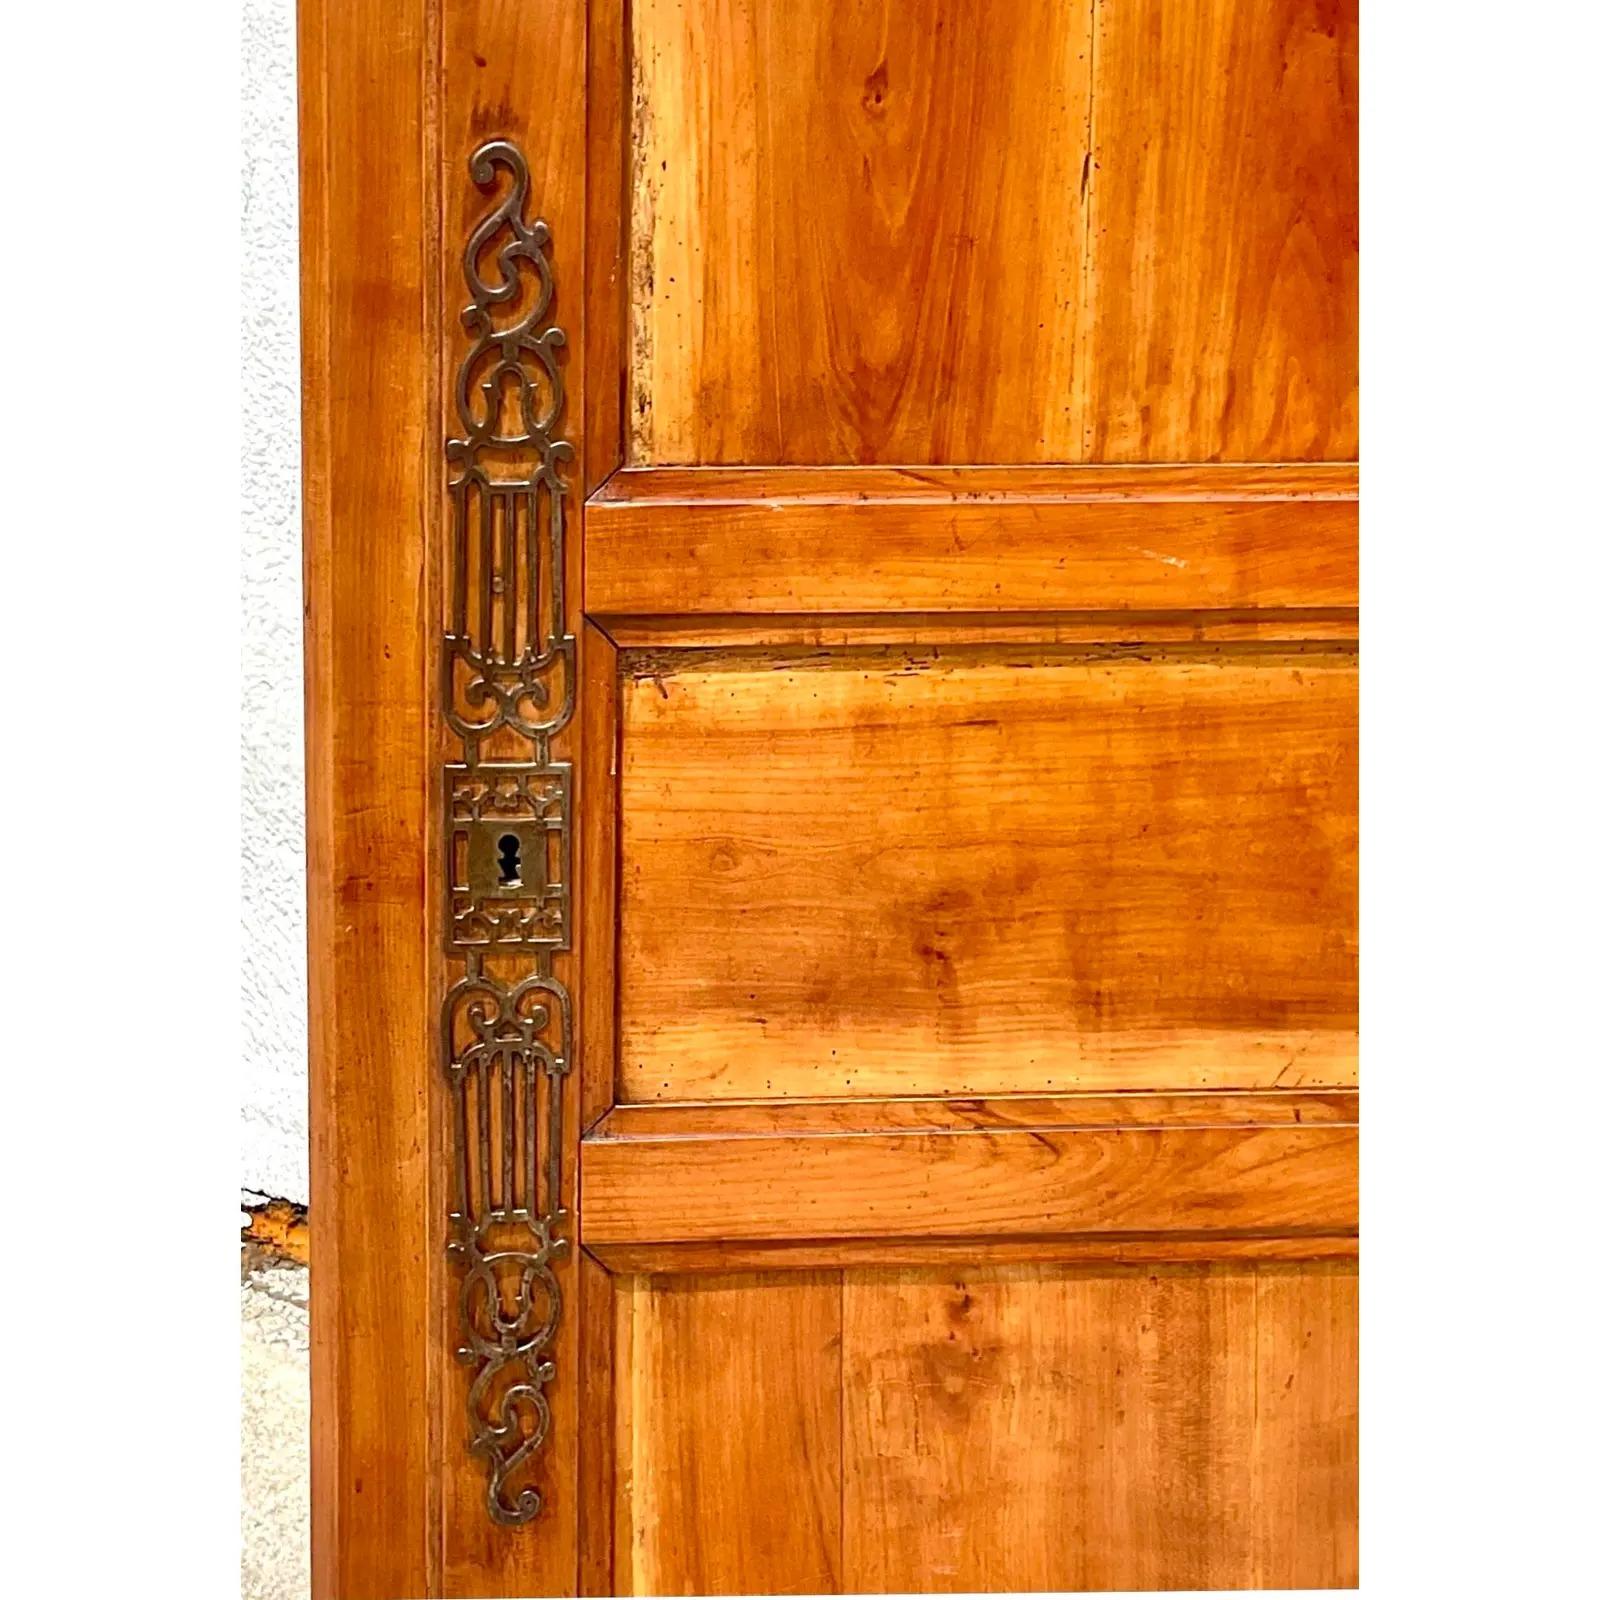 A fantastic vintage French Armoire. Beautiful hand carved detail with heavy brass hardware. Tall and impressive. Acquired from a Palm Beach estate. 

The armoire is in great vintage condition. Minor scuffs and blemishes appropriate to its age and